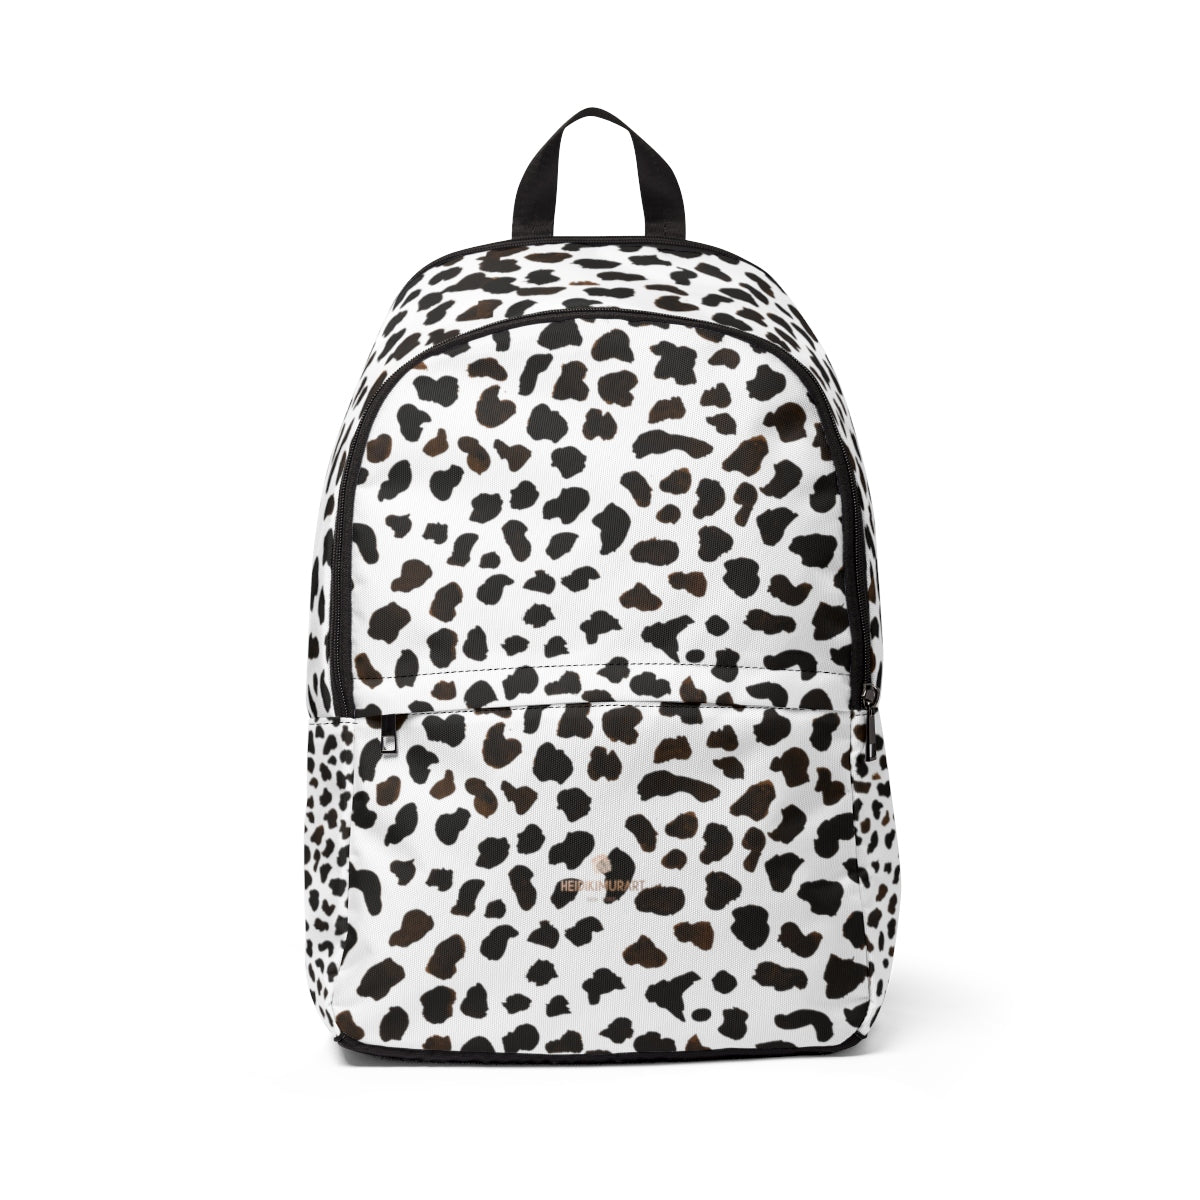 White Moo Cow Animal Print Designer Unisex Fabric Backpack School Bag-Backpack-One Size-Heidi Kimura Art LLC White Cow Print Backpack, White Moo Cow Animal Print Designer Unisex Fabric Lightweight Water-Resistant Backpack School Bag With Laptop Slot, Cow Print Backpack, Cow Backpack With Adjustable Straps